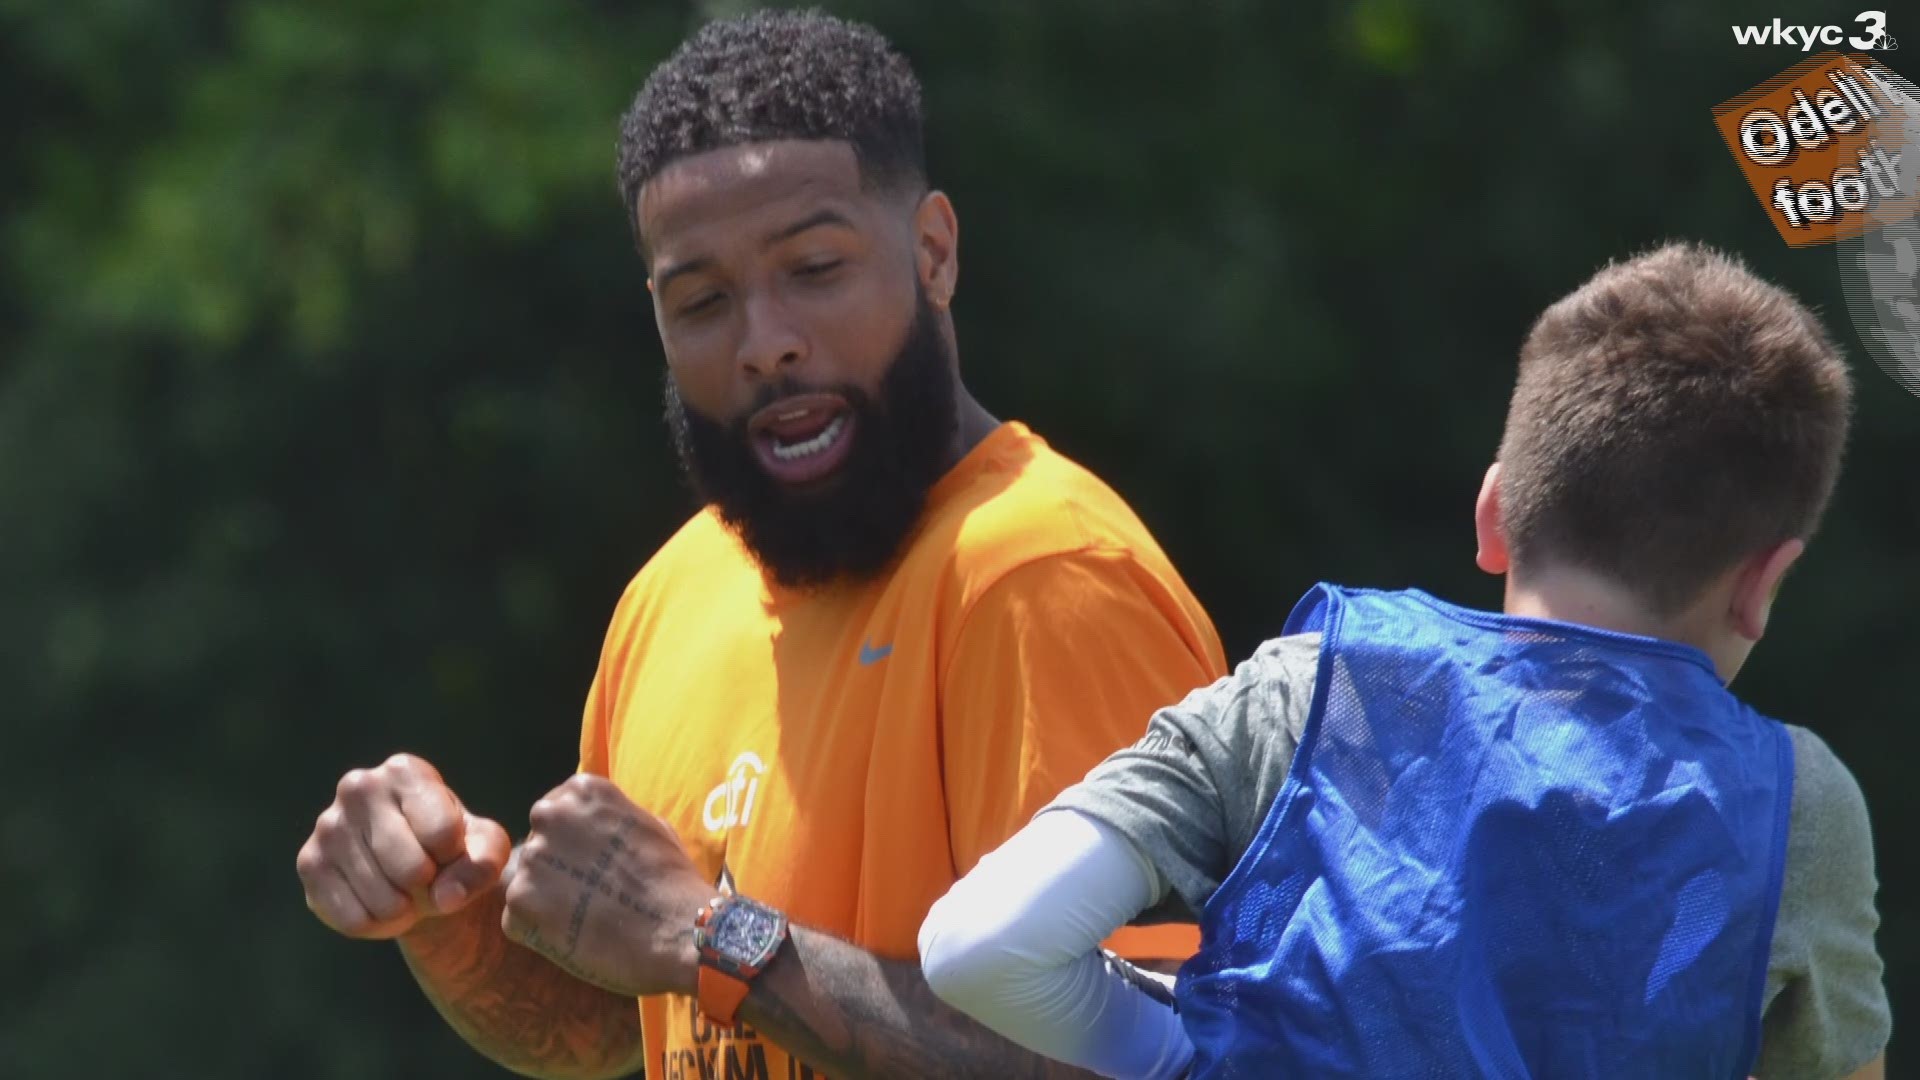 The Cleveland Browns are just days away from opening training camp, and wide receiver Odell Beckham Jr. believes the team is on the rise after years of struggles.